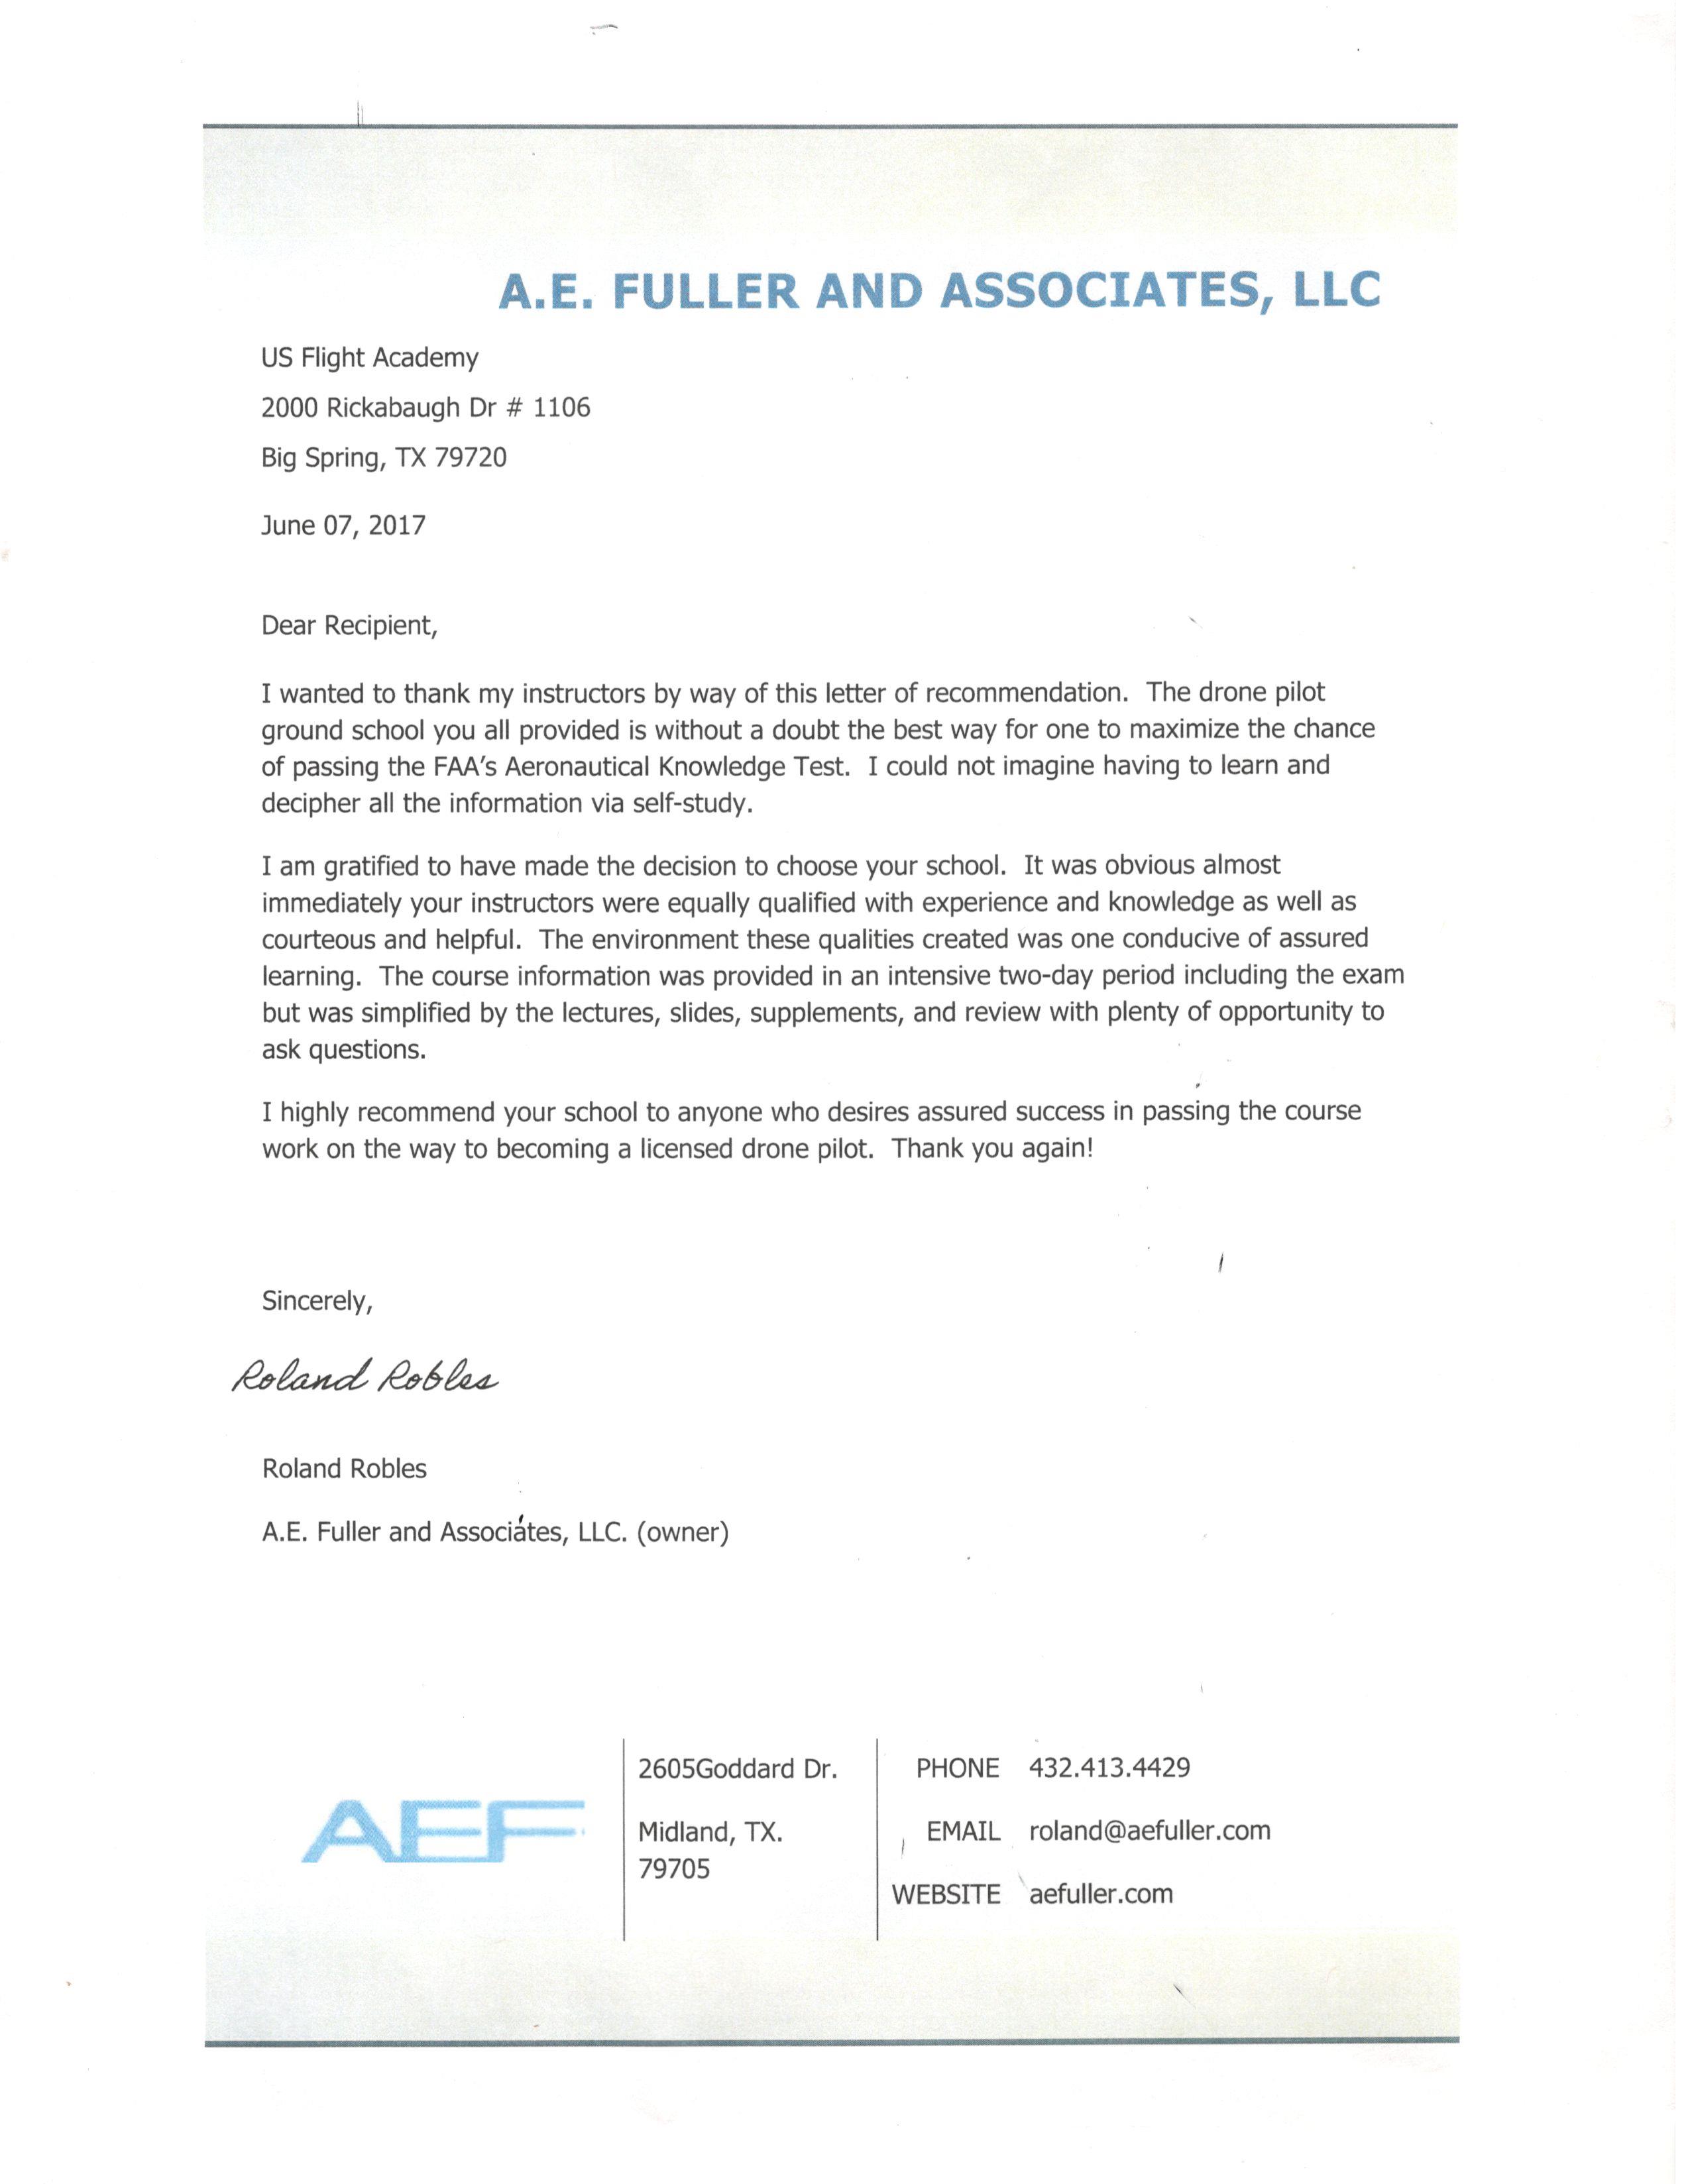 A.E. Fuller and Associates, LLC letter of recommendation